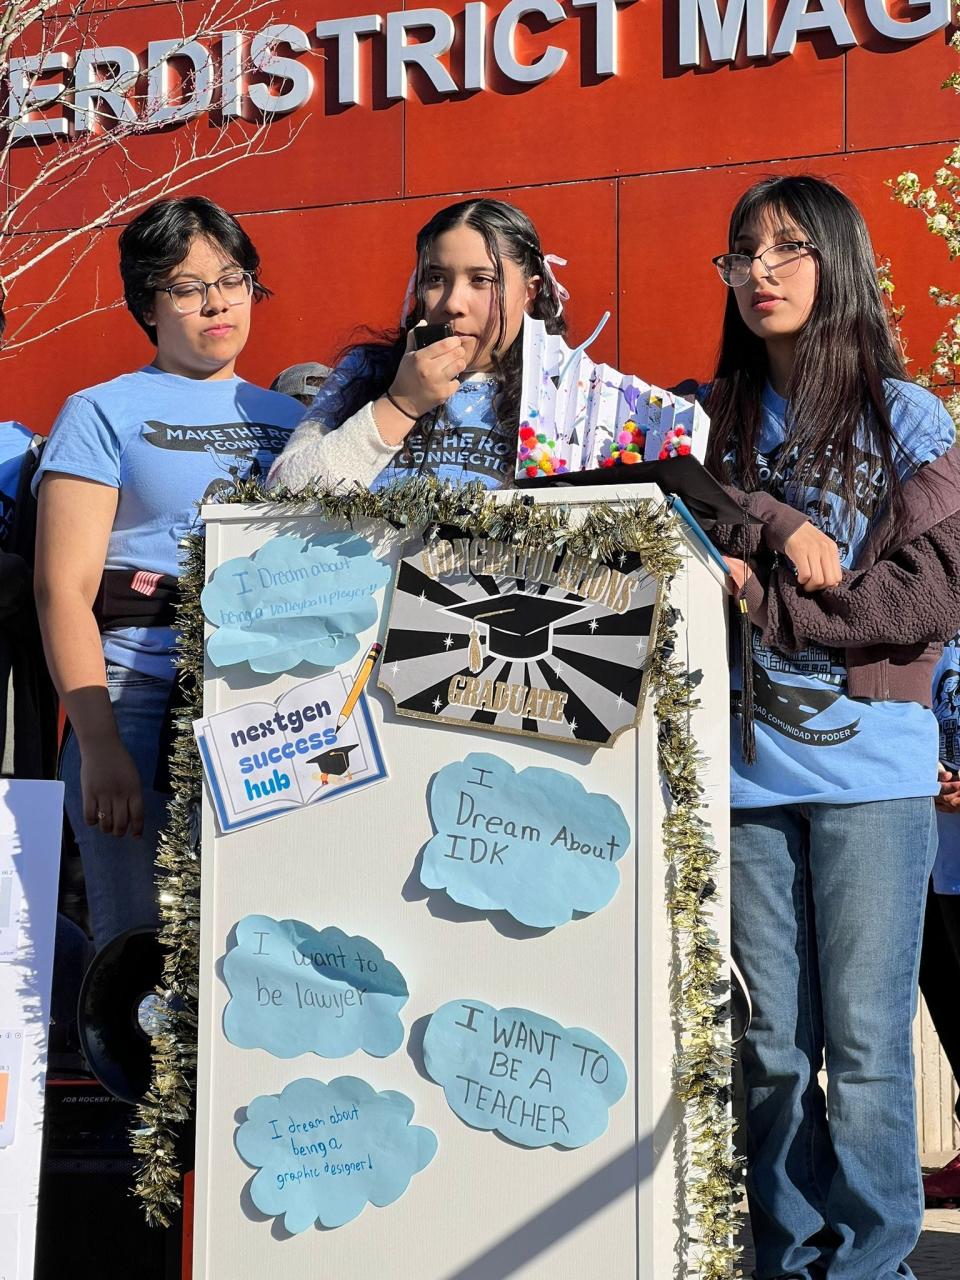 Tracey Elizabeth Garcia (left) and Arantza Victoria Gonzalez Cardenas (middle) say the disparities between their hometown and nearby communities are so drastic that people accept them as intractable. They serve as youth advocates for Make the Road Connecticut, a community organization that works on educational equity and other issues.